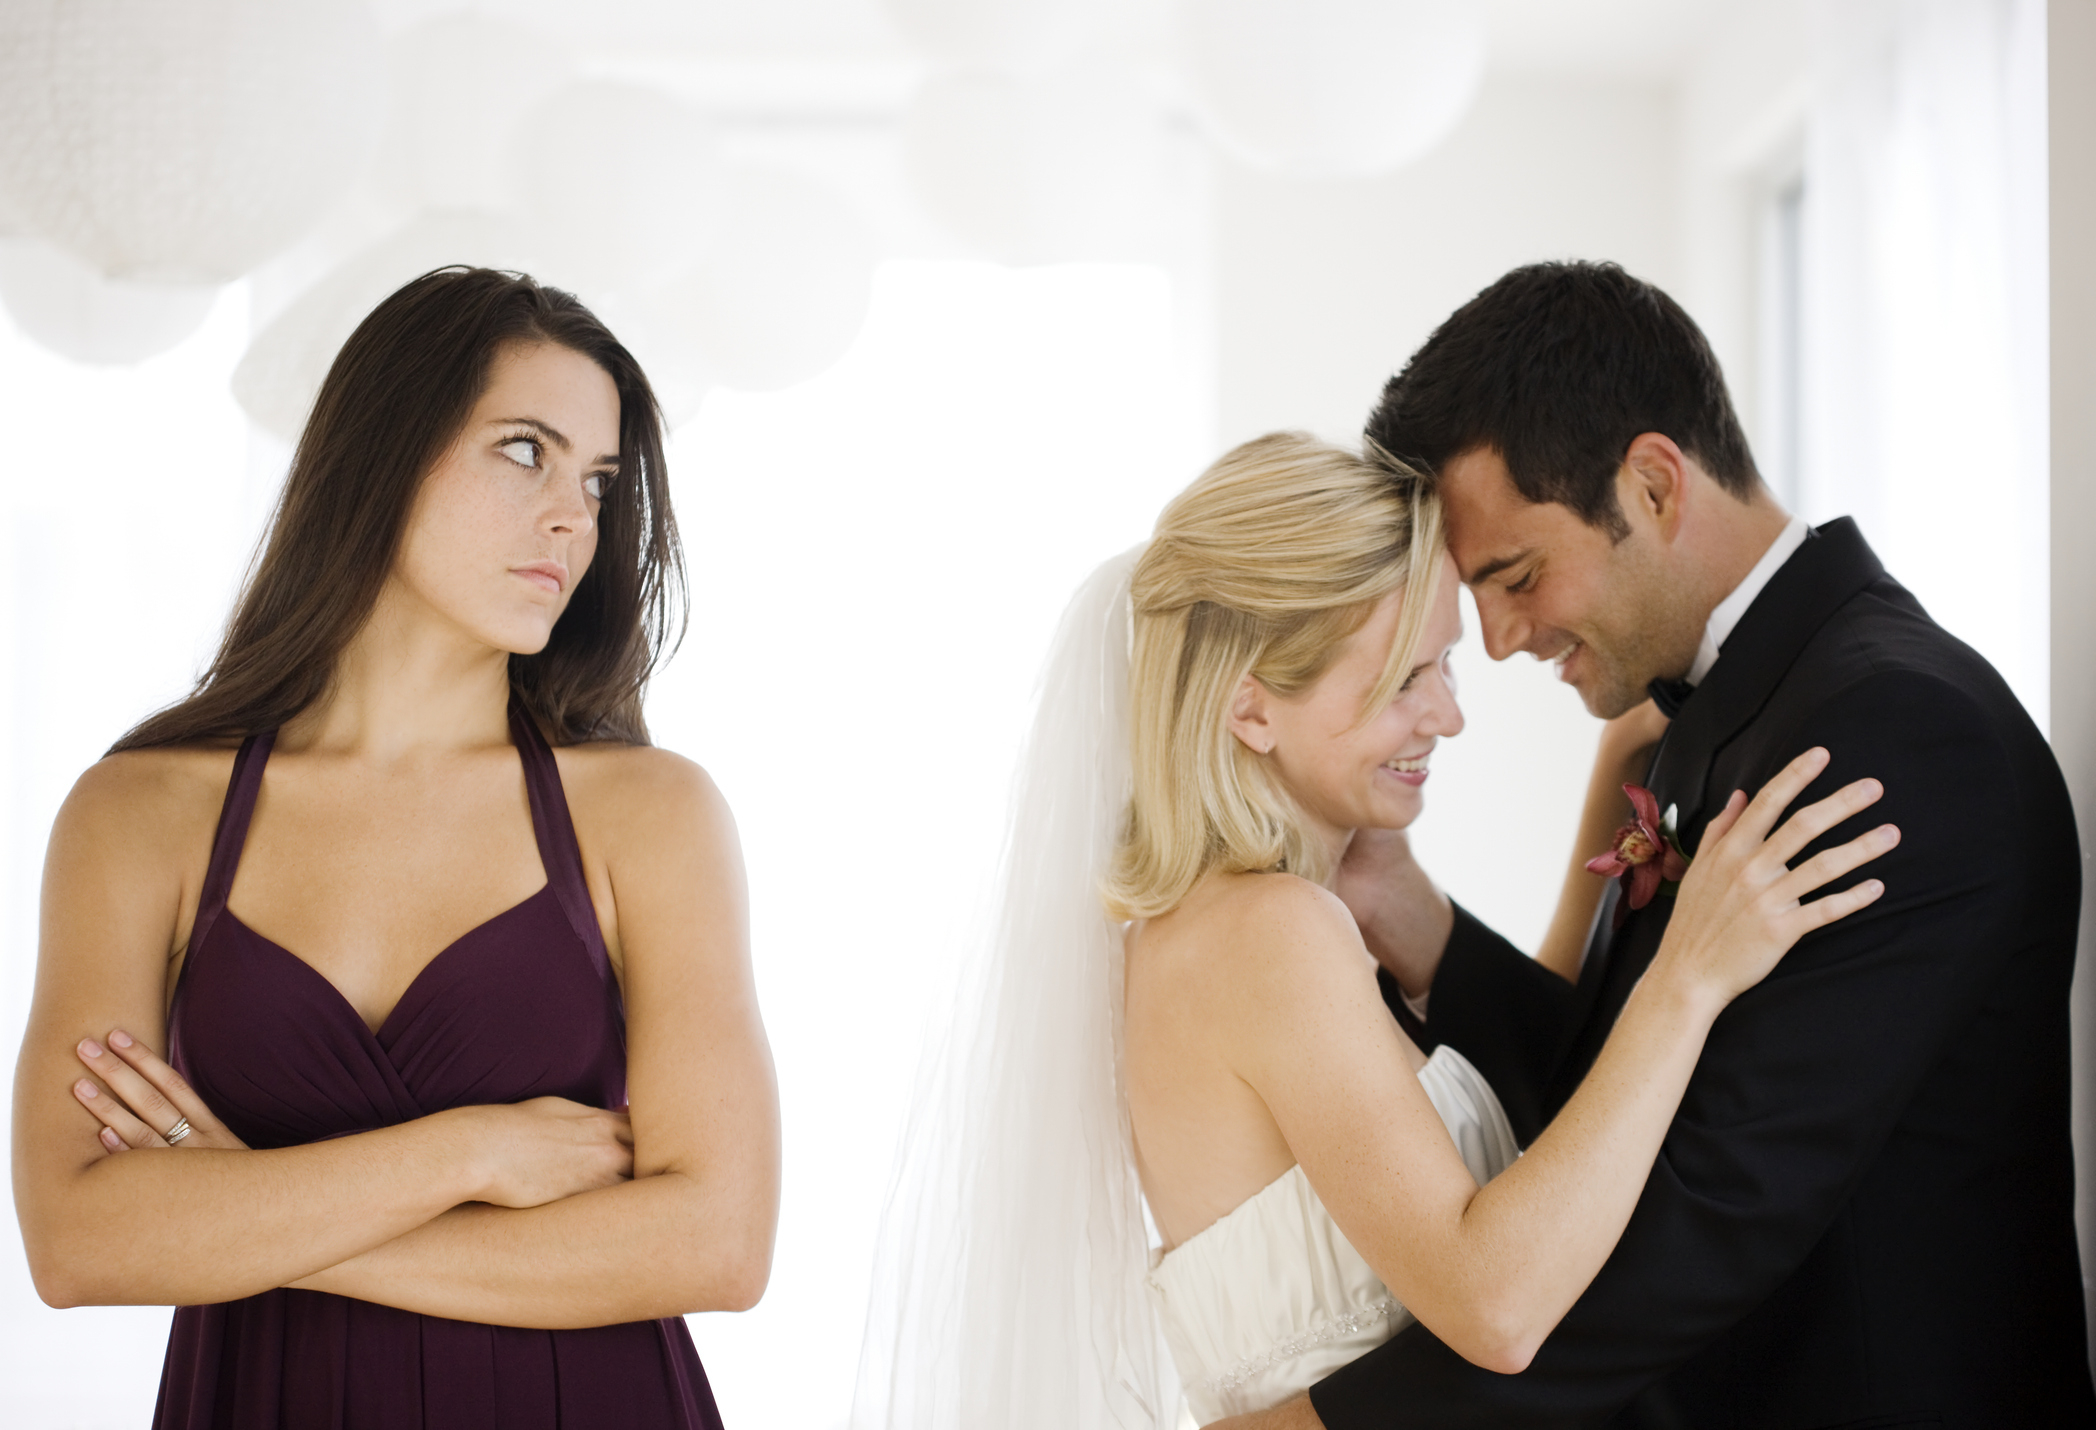 Woman in bridesmaid dress looks on angrily as bride and groom embrace